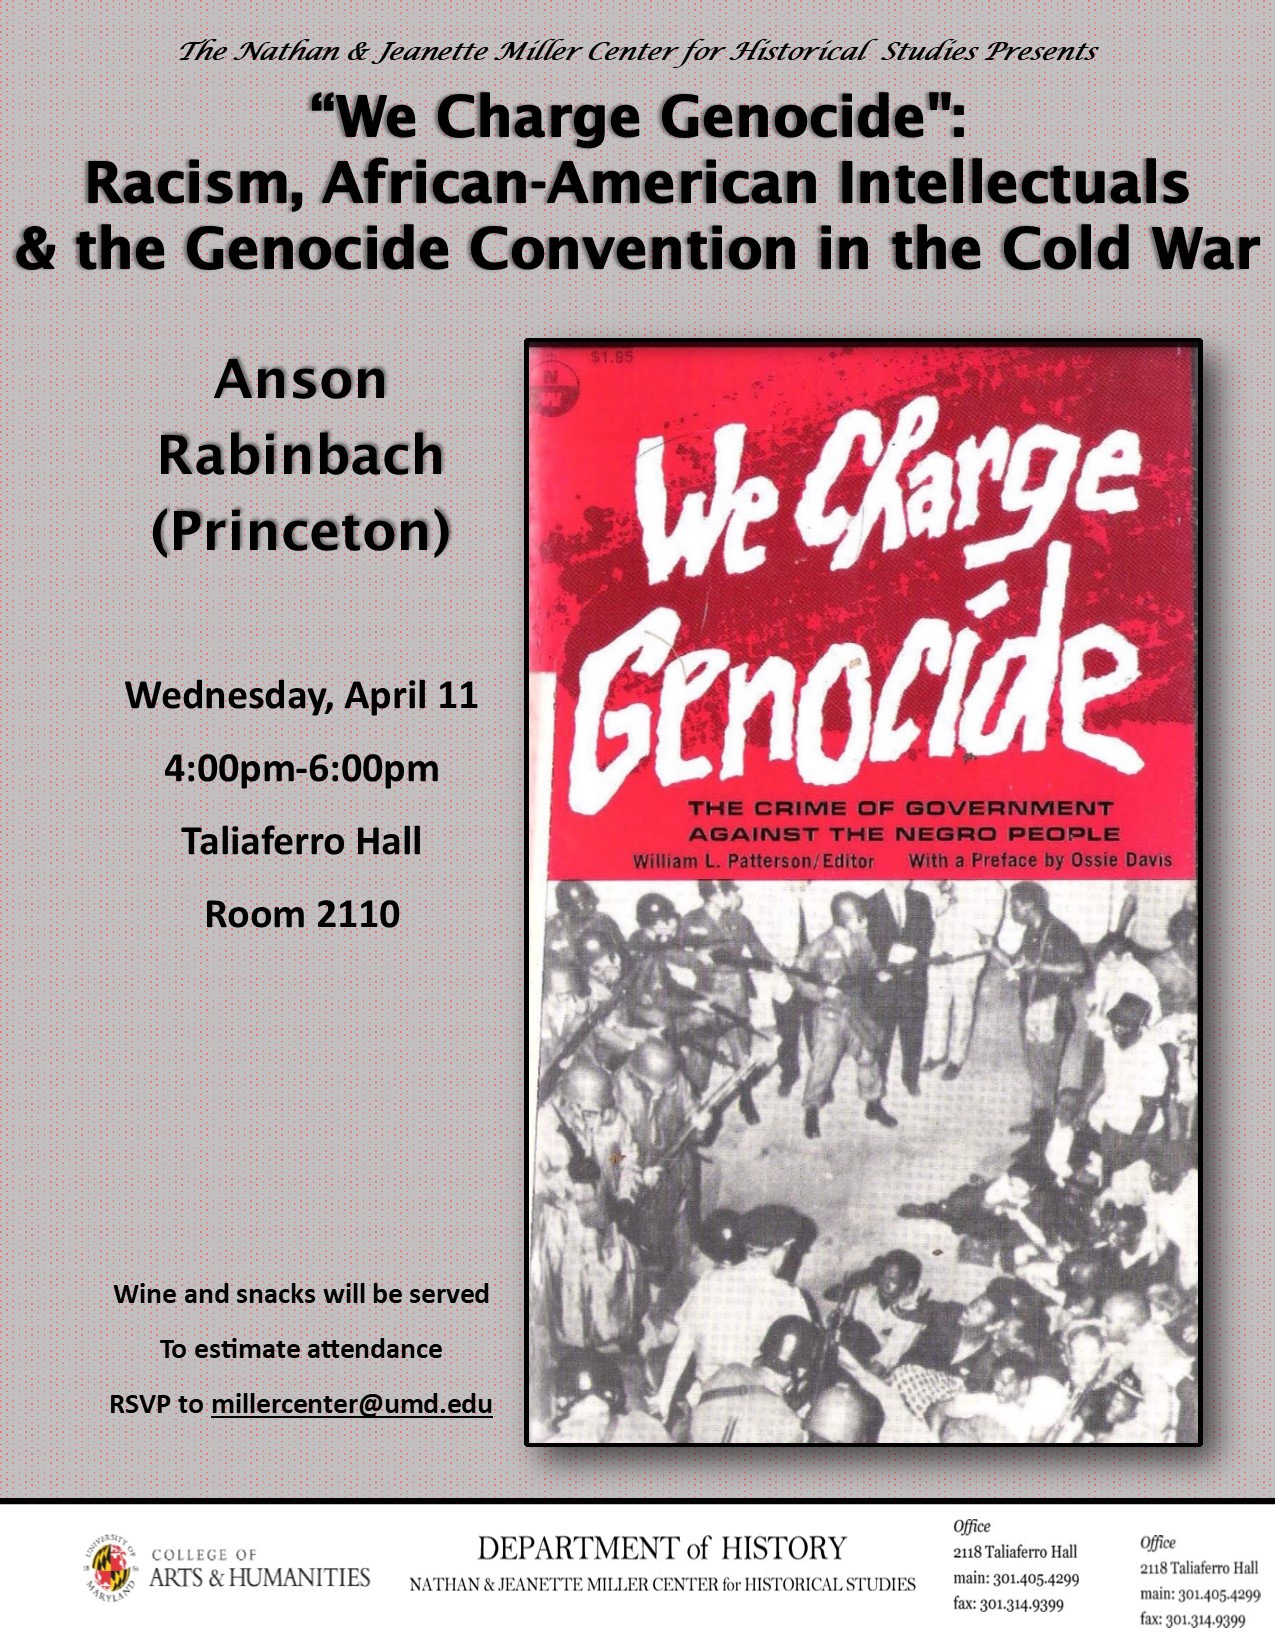 We Charge Genocide:  Racism, African-American Intellectuals and the Genocide Convention in the Cold War